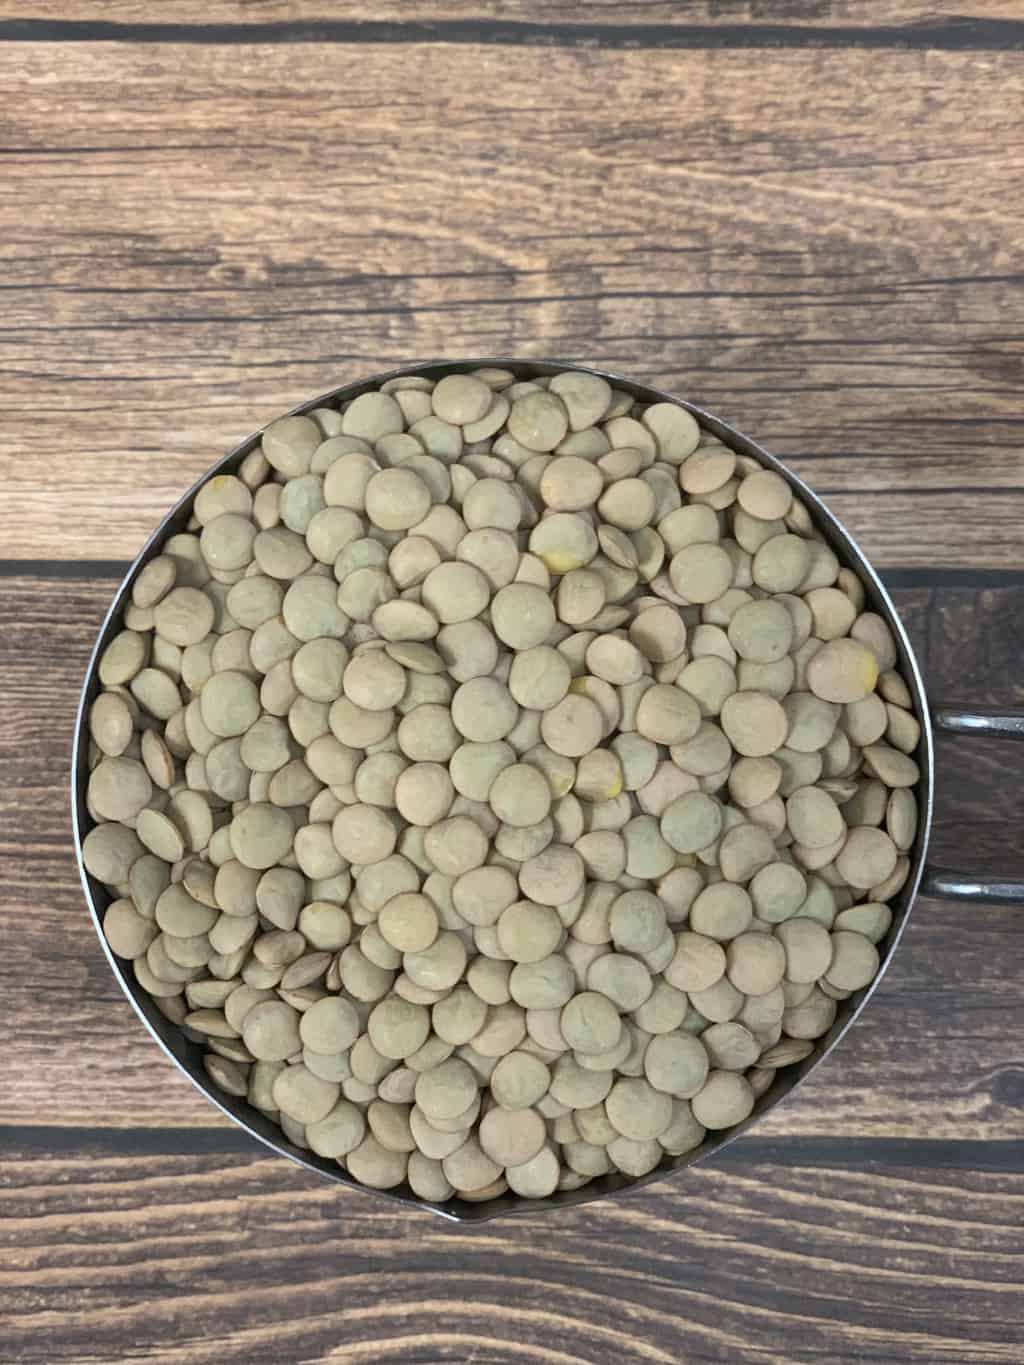 Green Lentils in a measuring cup